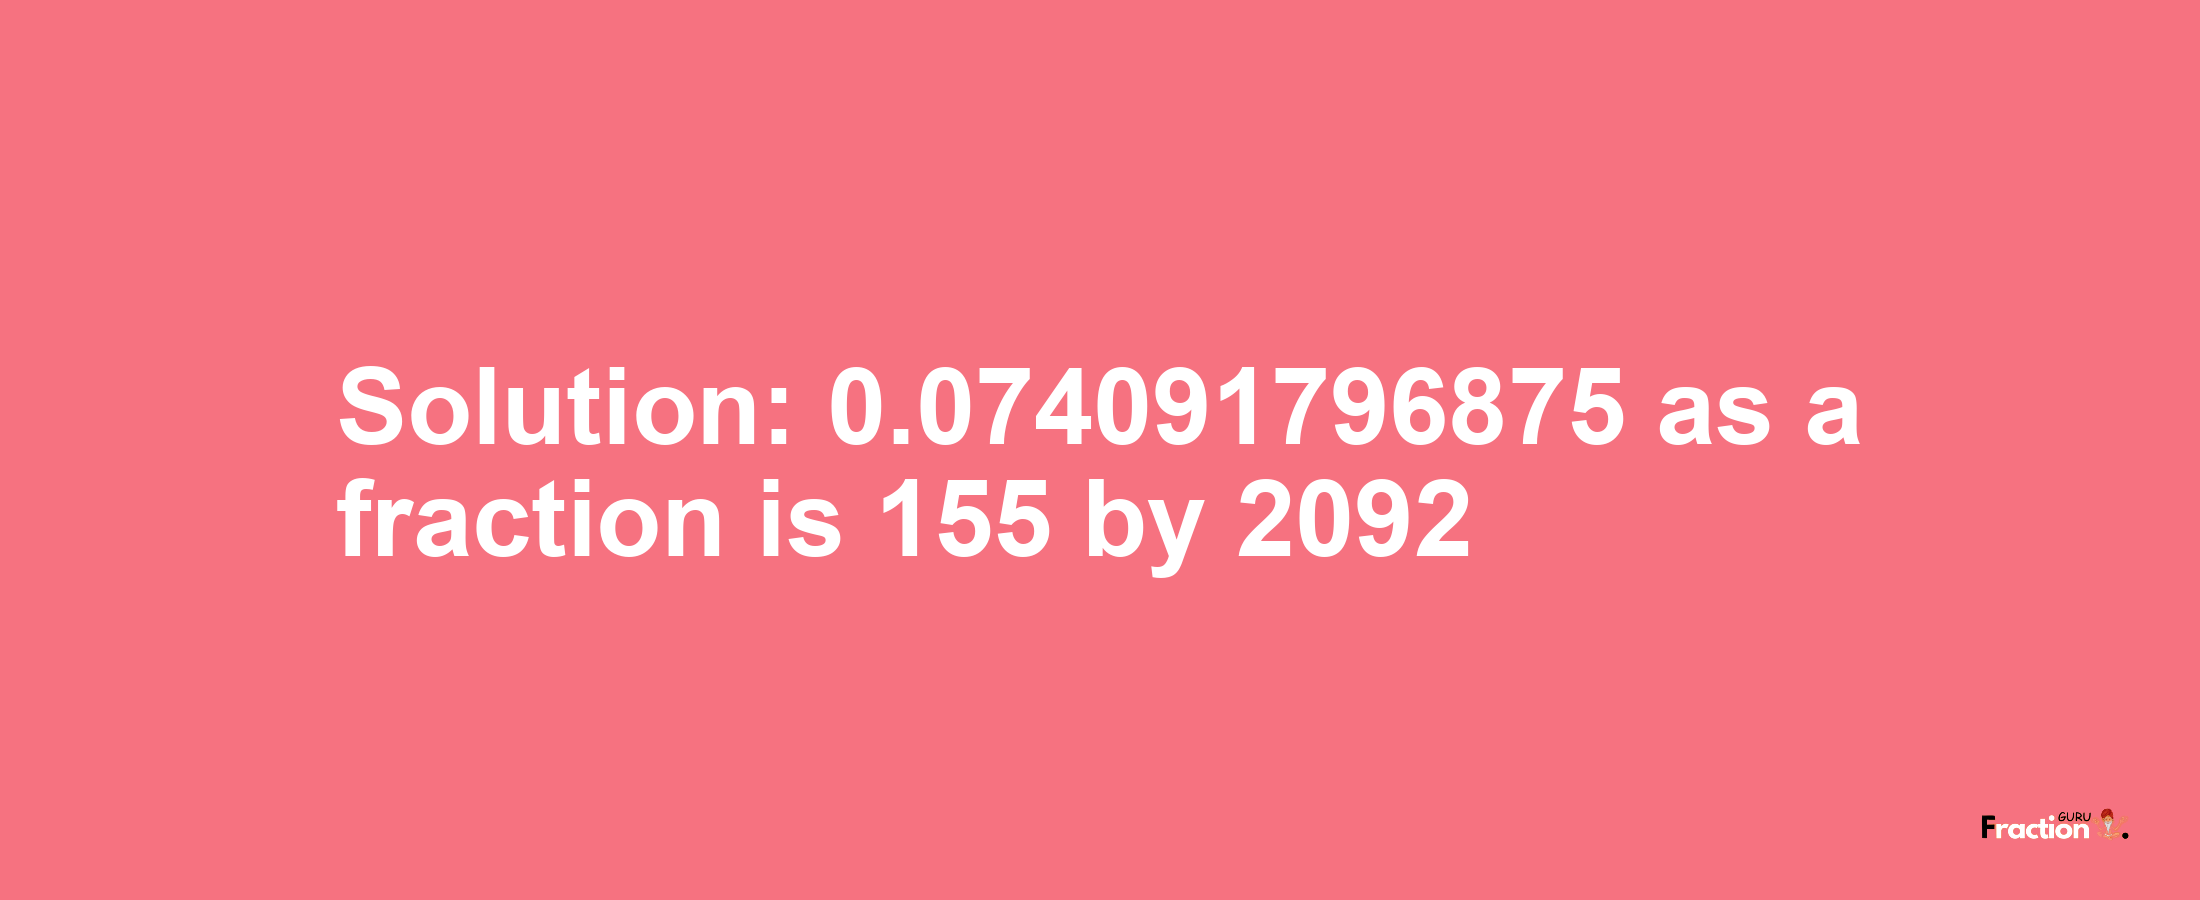 Solution:0.074091796875 as a fraction is 155/2092